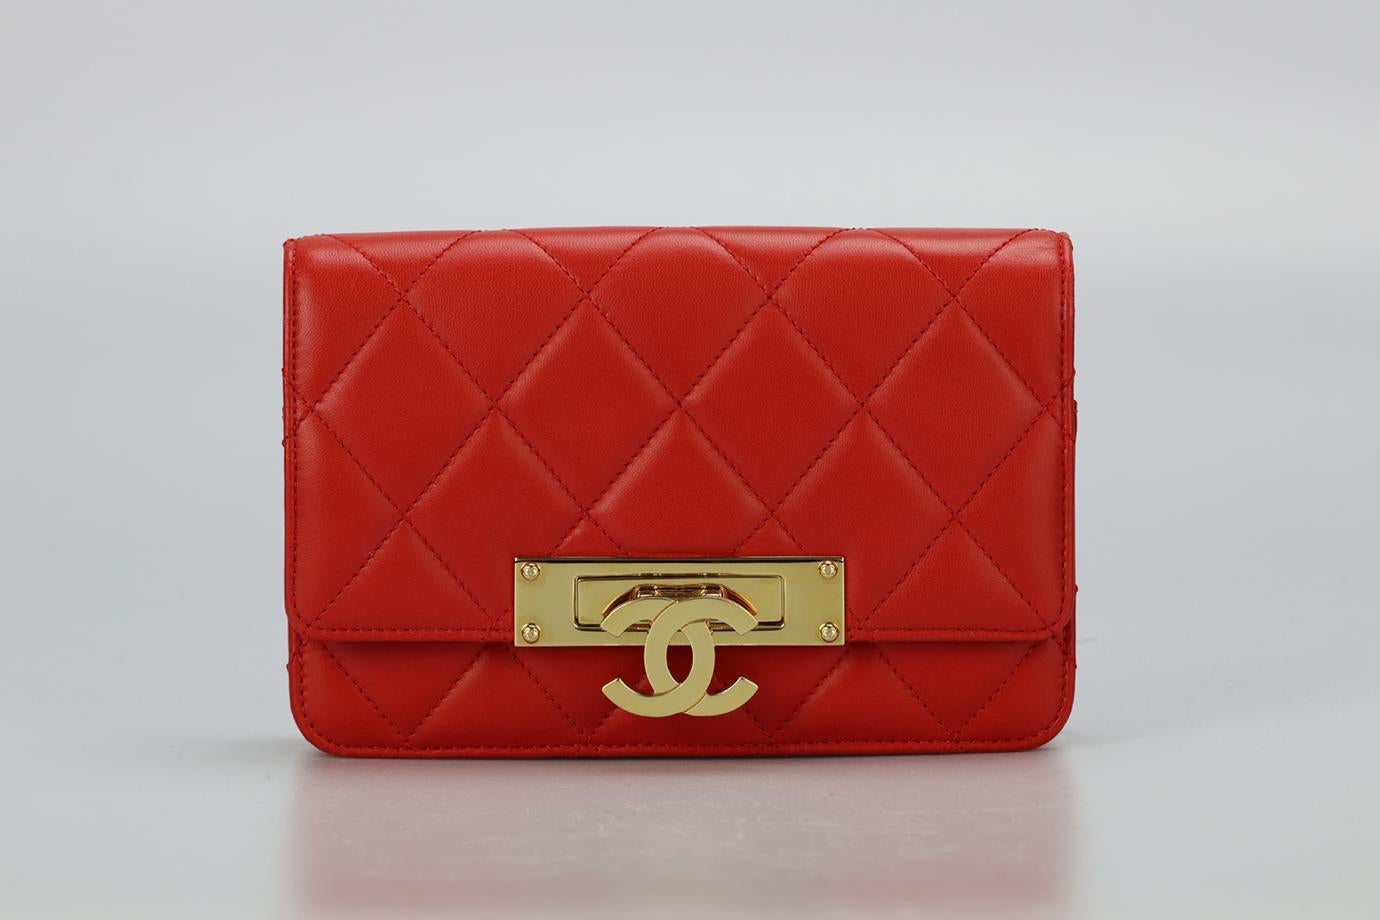 Chanel 2015 Golden Class Wallet On Chain Quilted Leather Shoulder Bag. Red. Lock fastening - Front. Comes with - dustbag and authenticity card. Height: 4.9 in. Width: 7.5 in. Depth: 1.2 in. Strap drop: 23 in. Condition: Used. Very good condition -